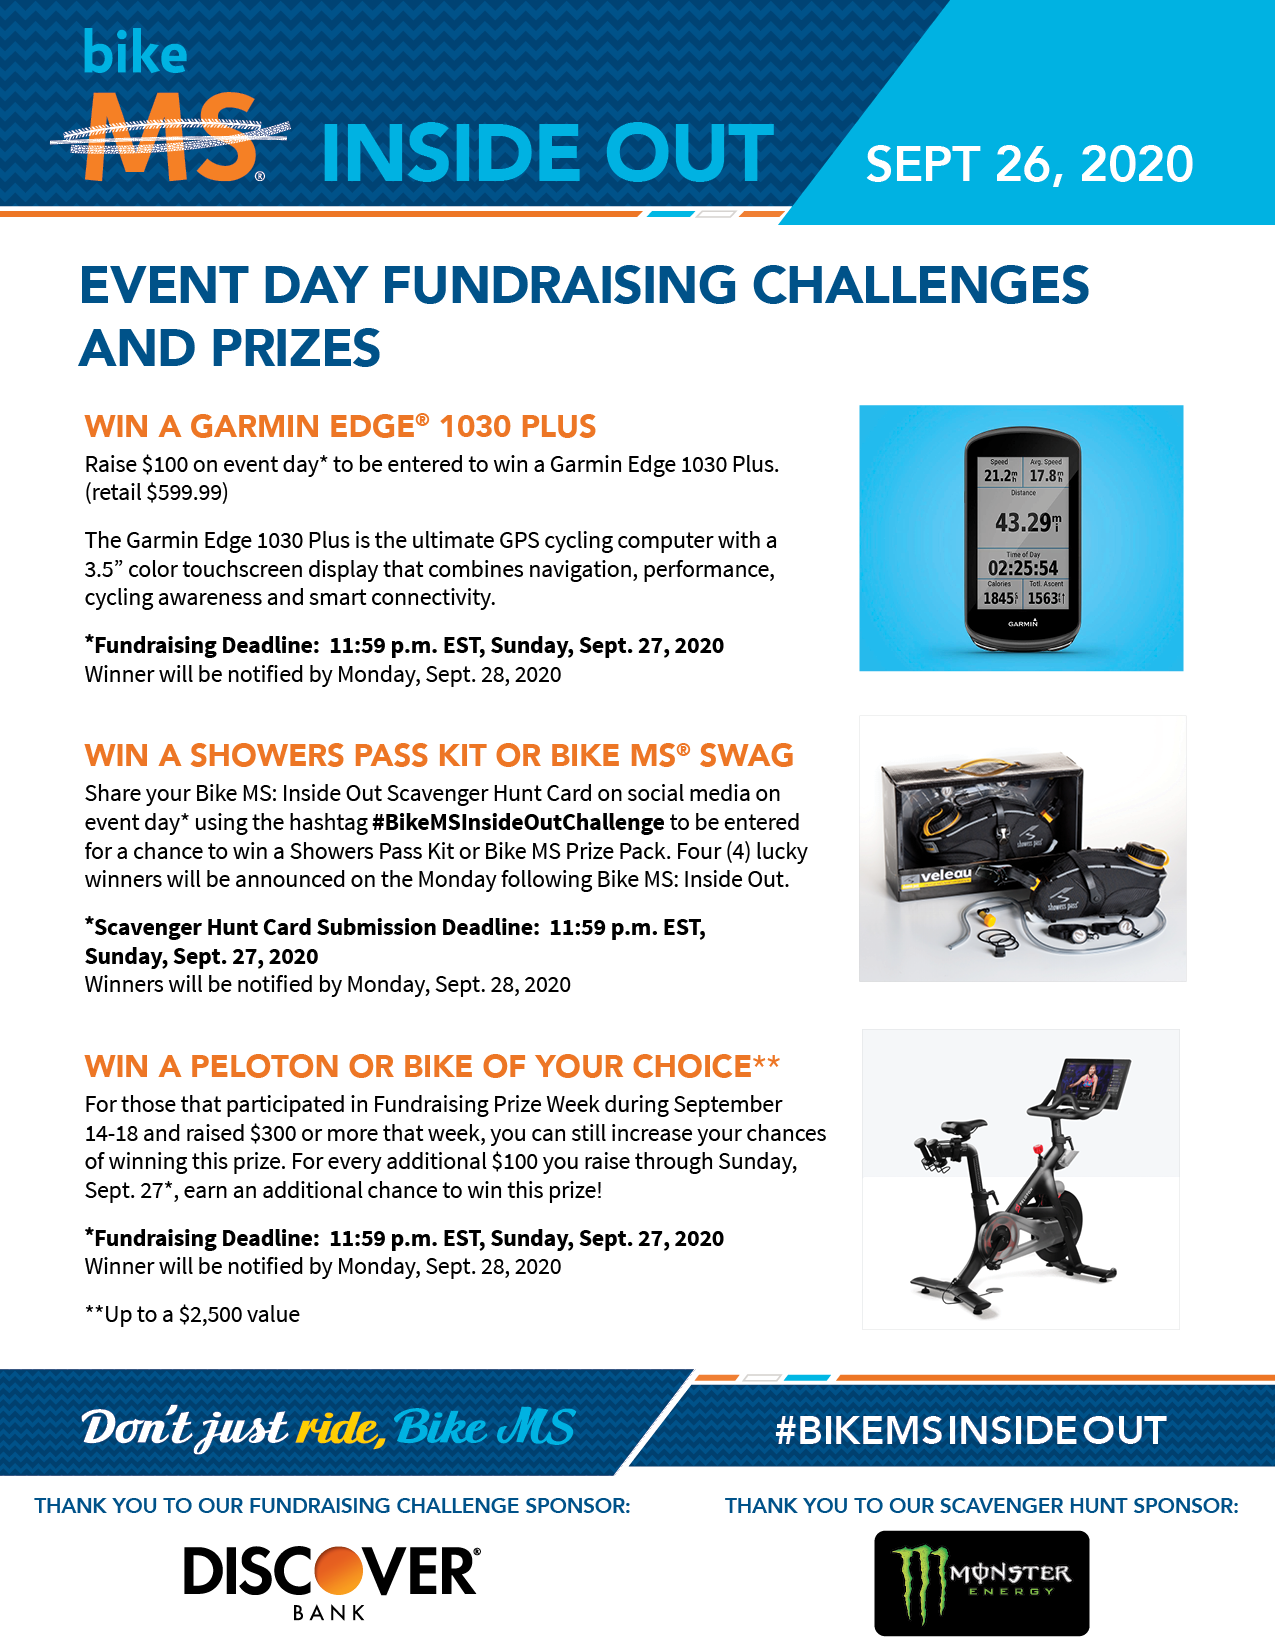 Fundraising Challenges and Prizes